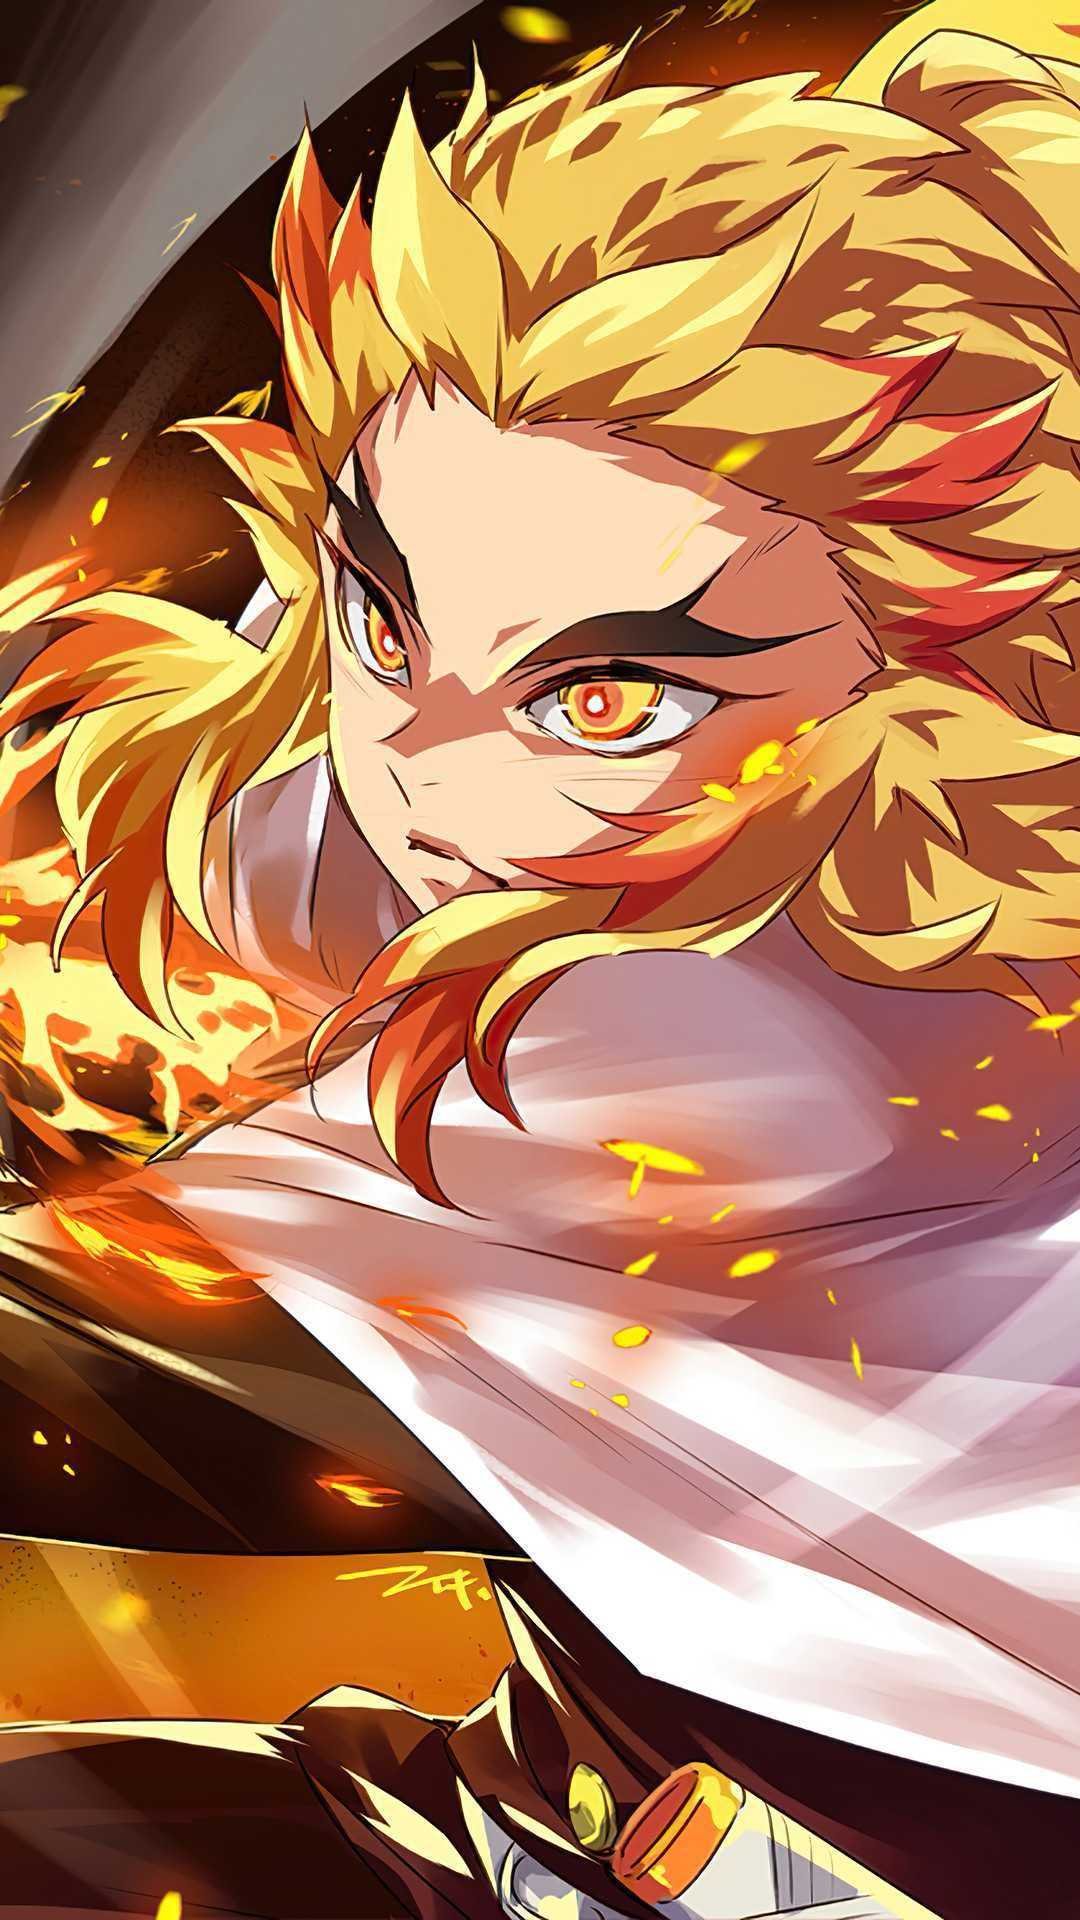 25 Rengoku Wallpapers for iPhone and Android by Crystal Brown